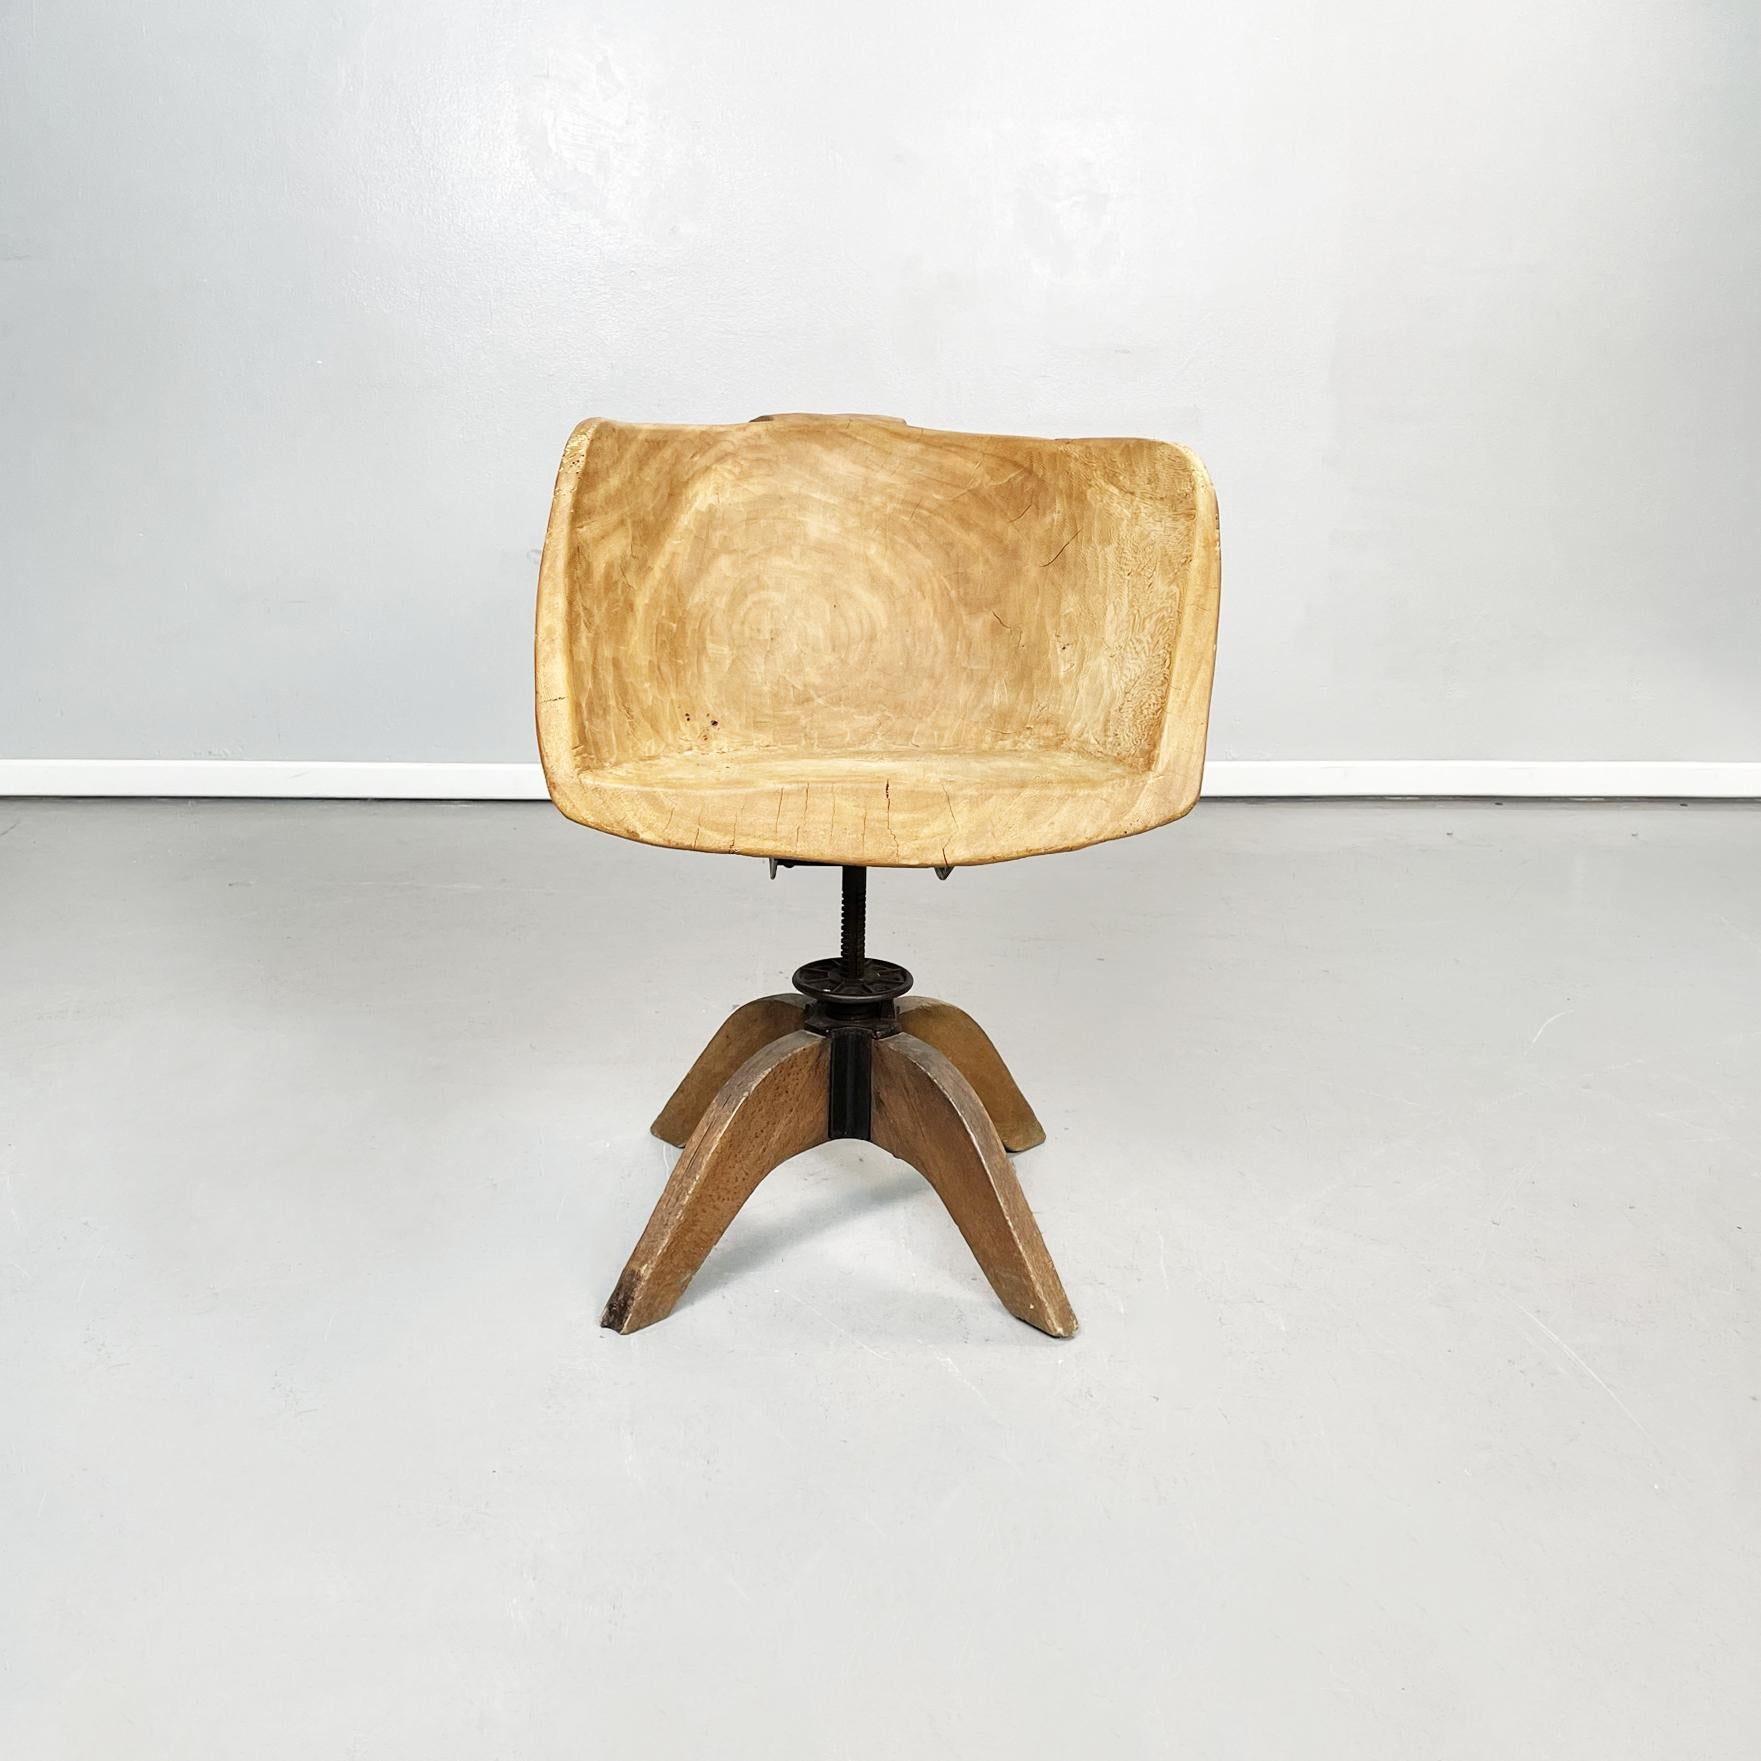 Italian post-modern Wooden armchair, 2000s
Armchair with wooden semicircle seat in brasilian wood. 
The backrest, armrests and seat are a single piece of worked wood, with rounded edges. The base is composed of a metal rod, which allows the chair to